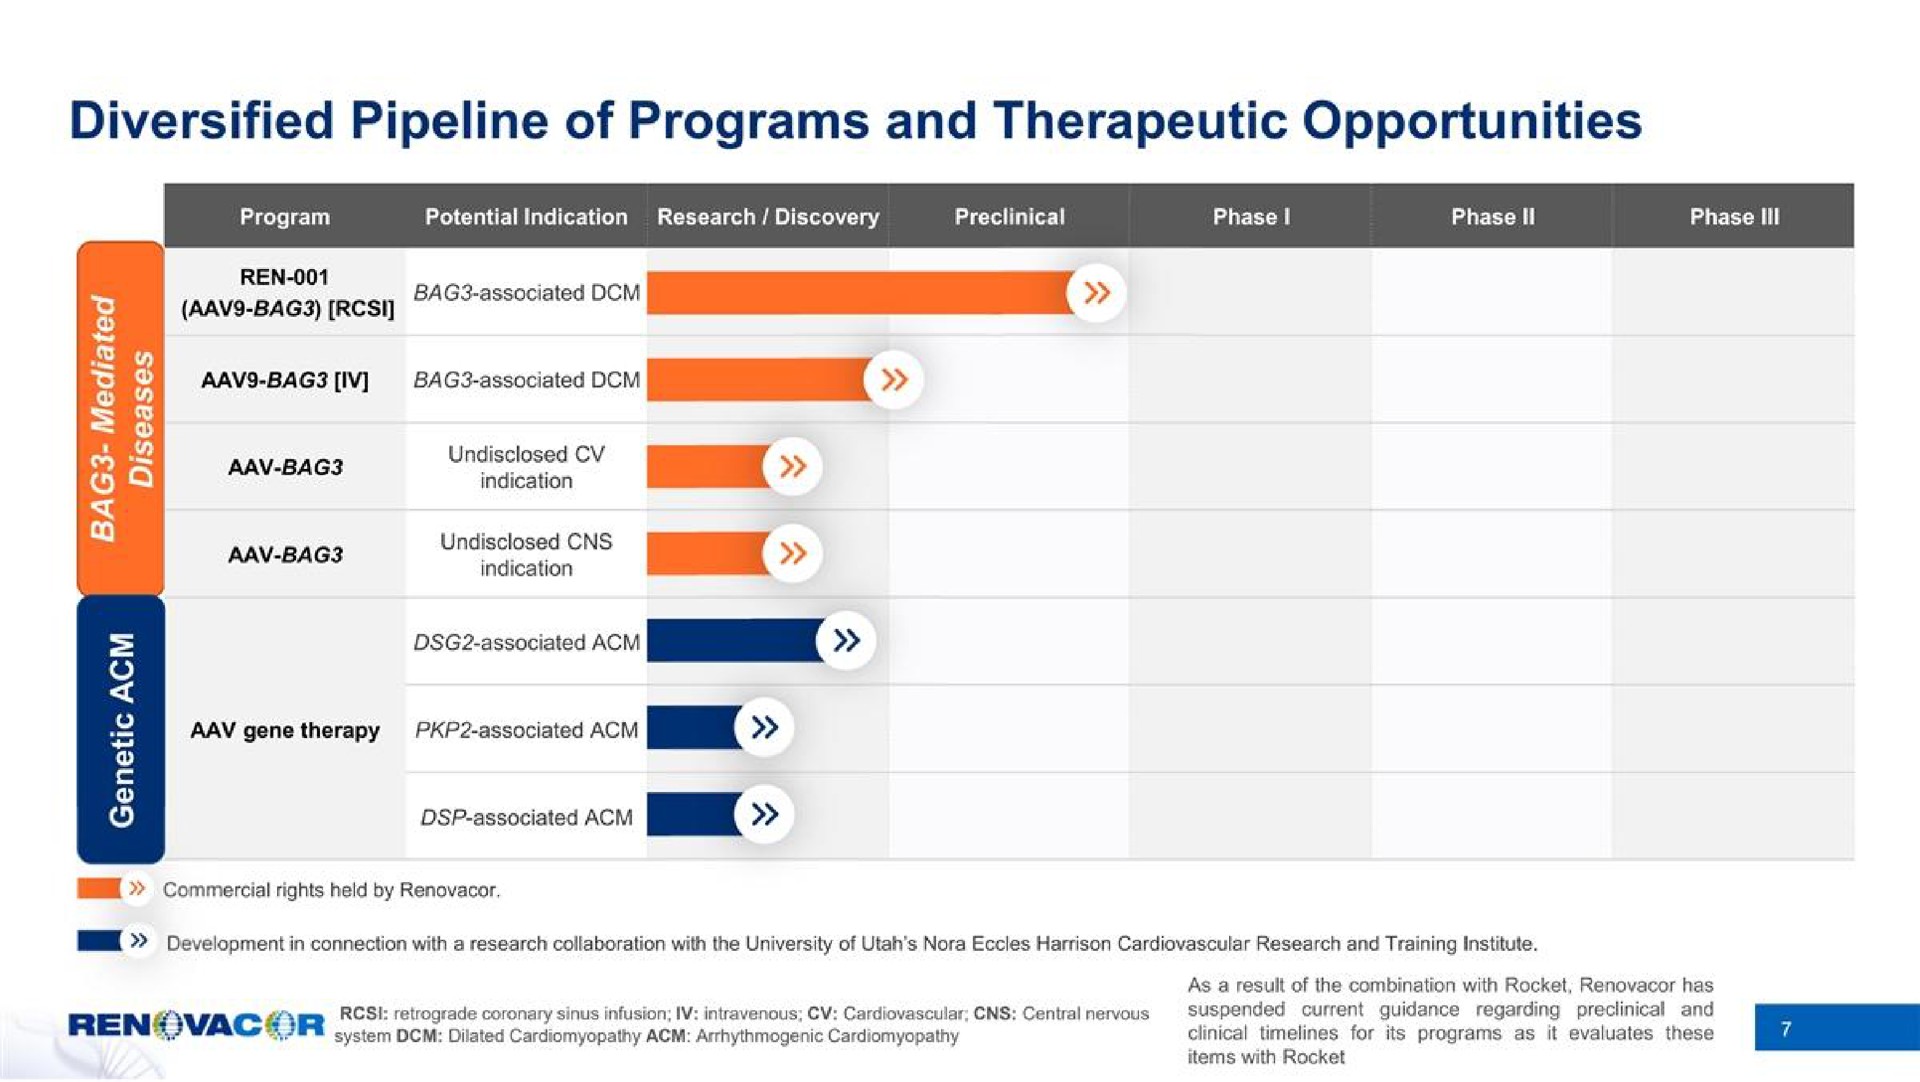 diversified pipeline of programs and therapeutic opportunities | Renovacor